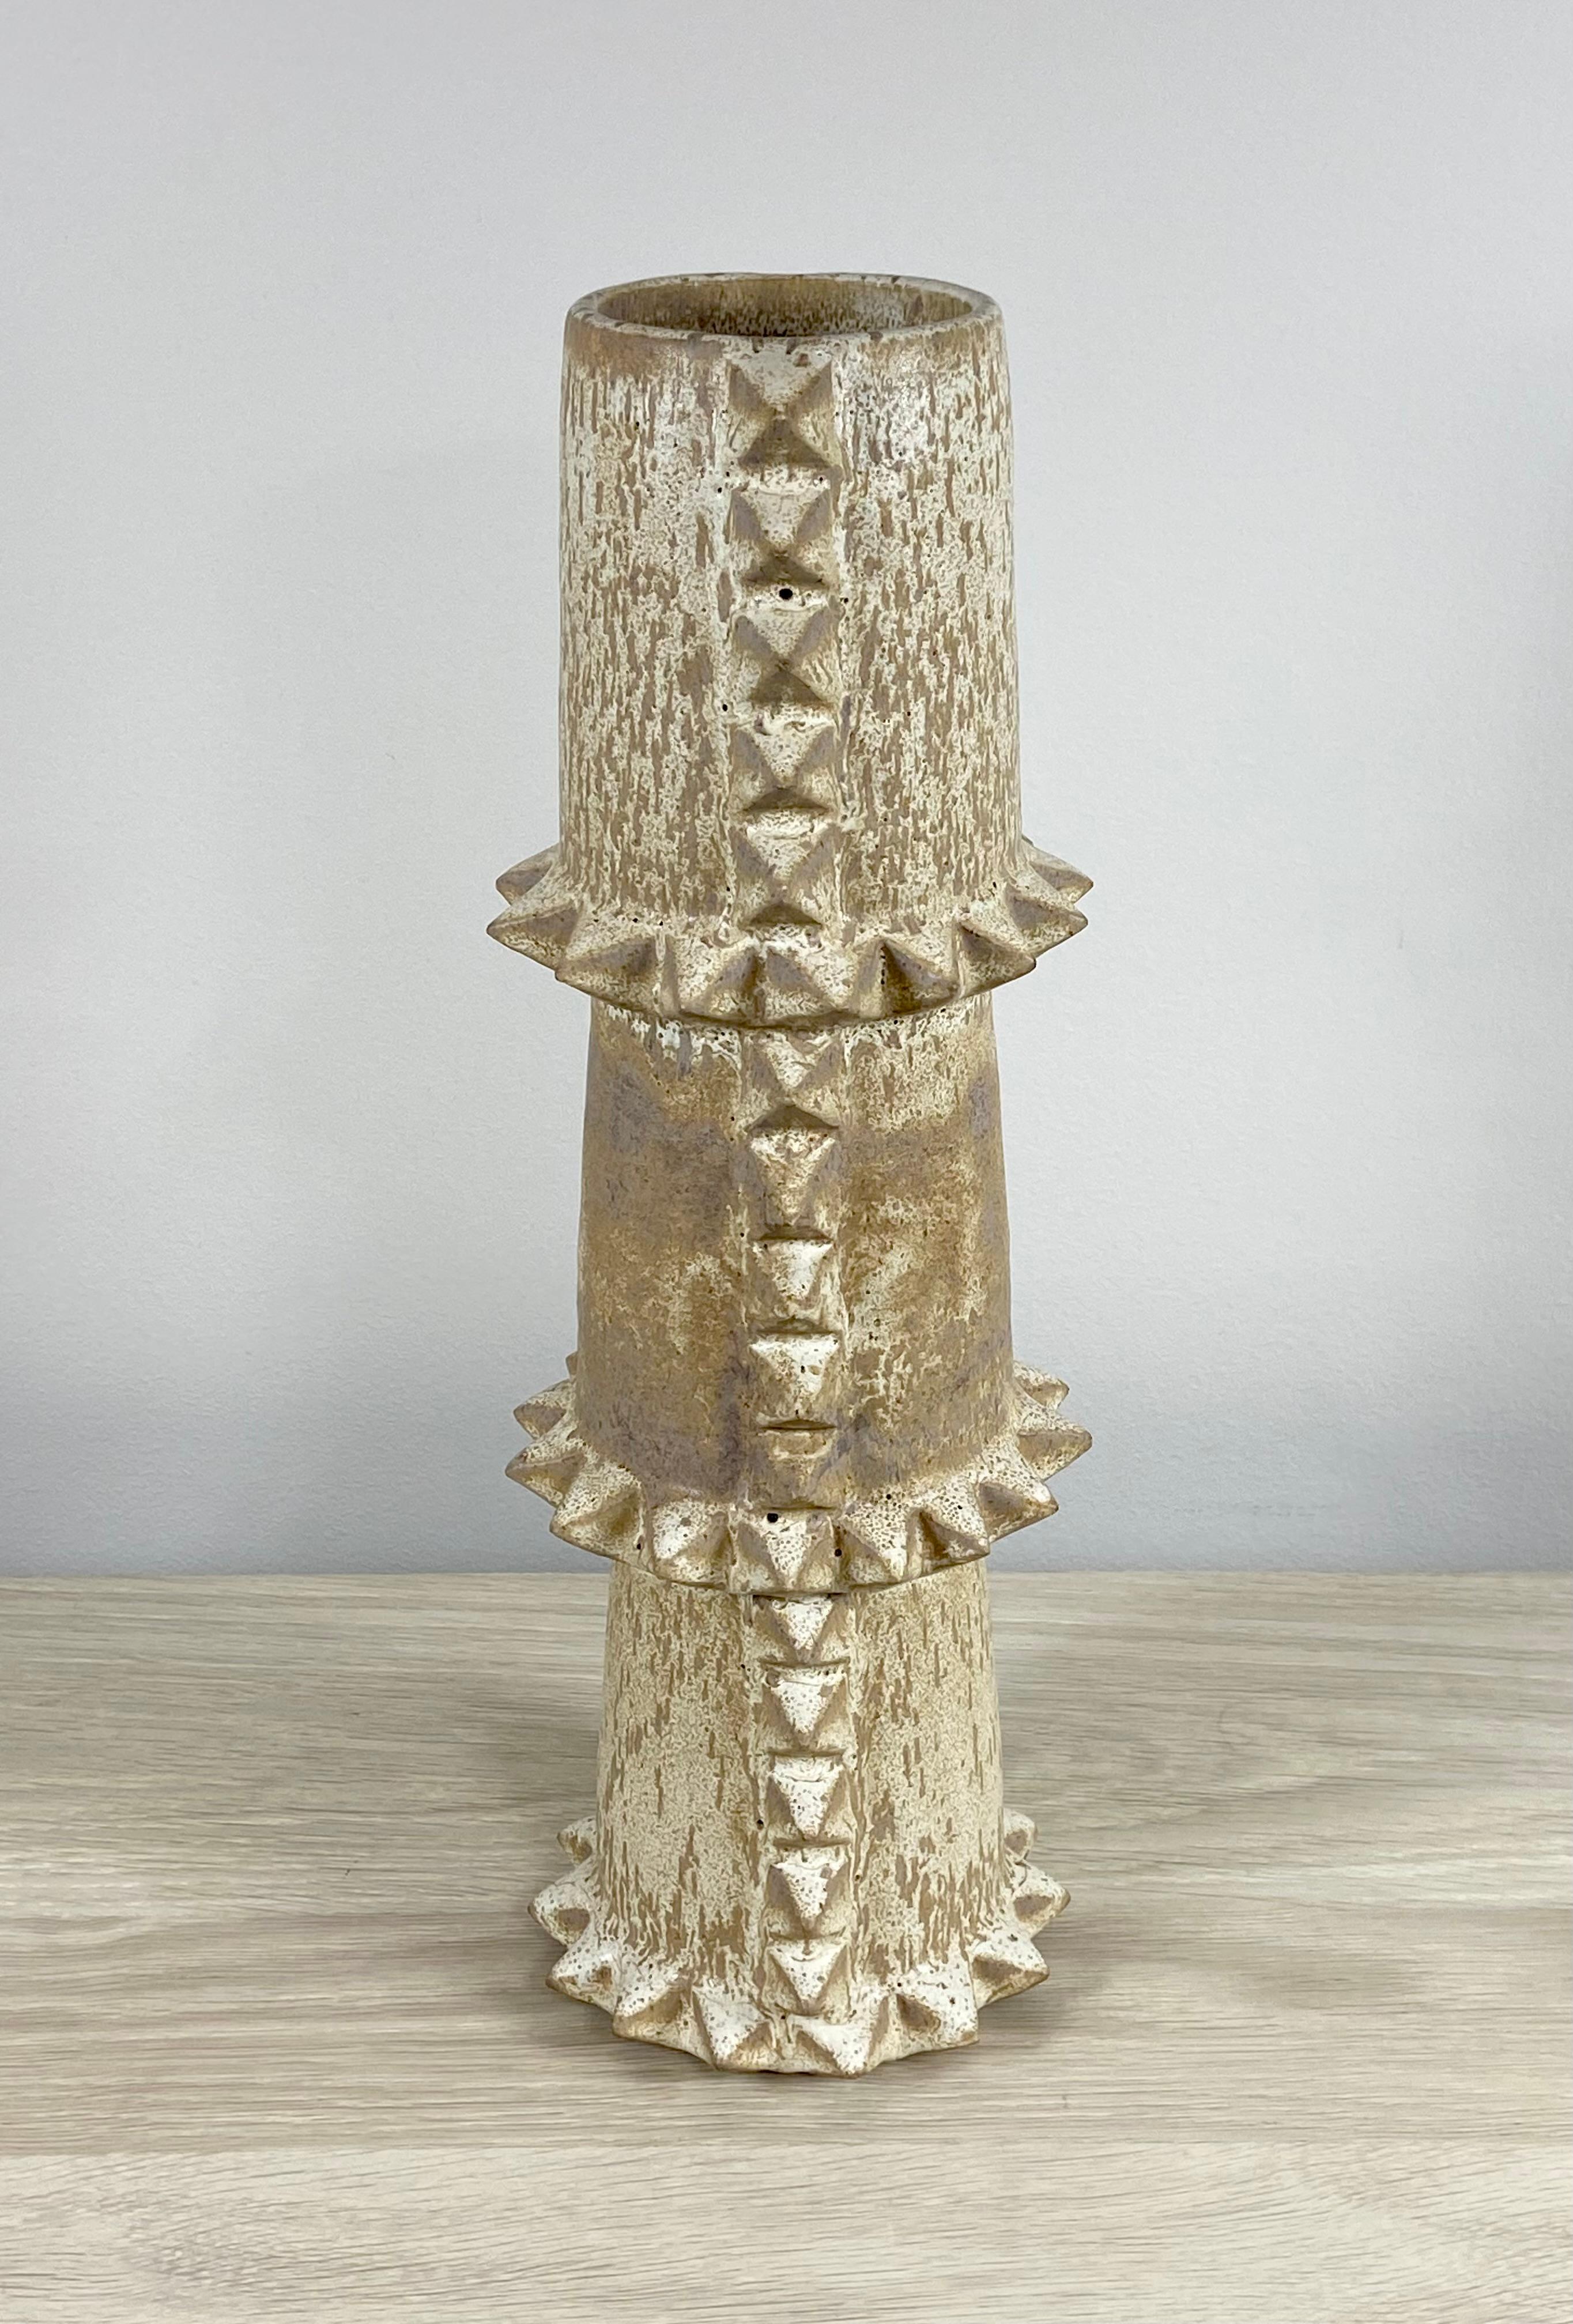 Tall Spiky Ceramic Vase By LGS Studio For Sale 5